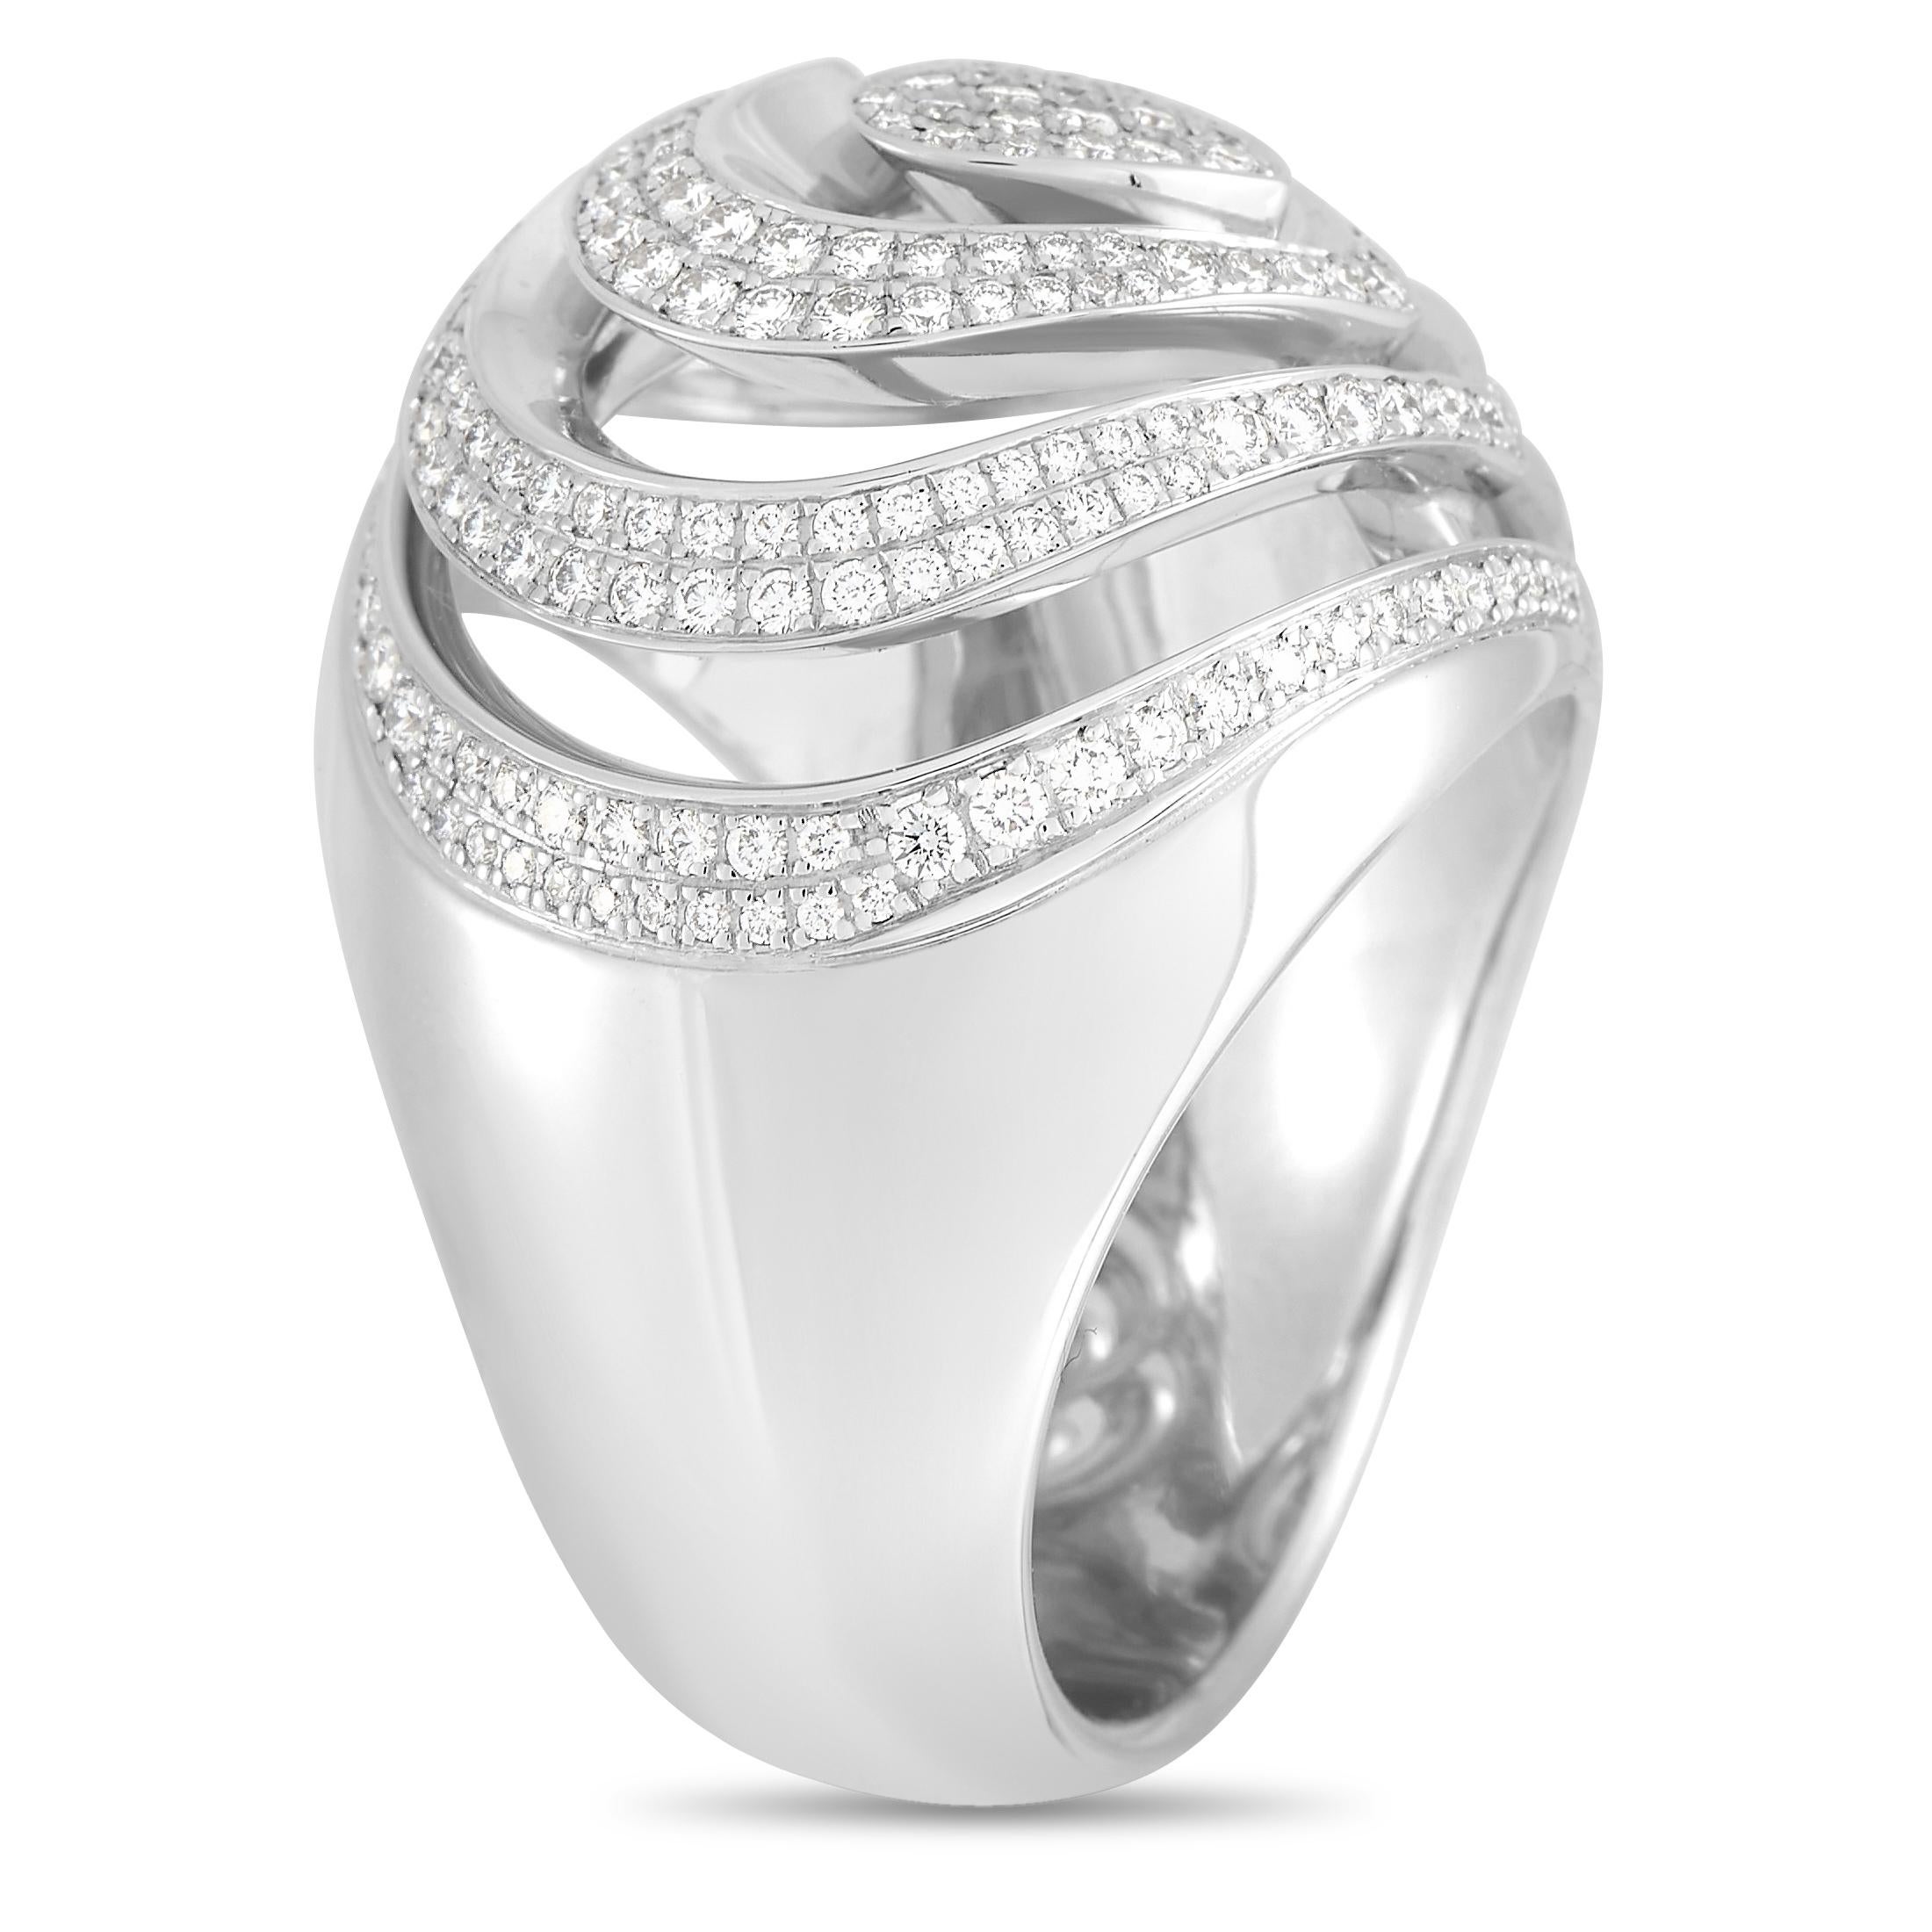 Negative space and a heart-shaped design makes this Chopard ring unlike anything you have seen before. Covered in diamonds totaling 1.17 carats, it features an 8mm wide band and a 12mm top height. Elegant 18K White Gold adds a touch of shimmer to